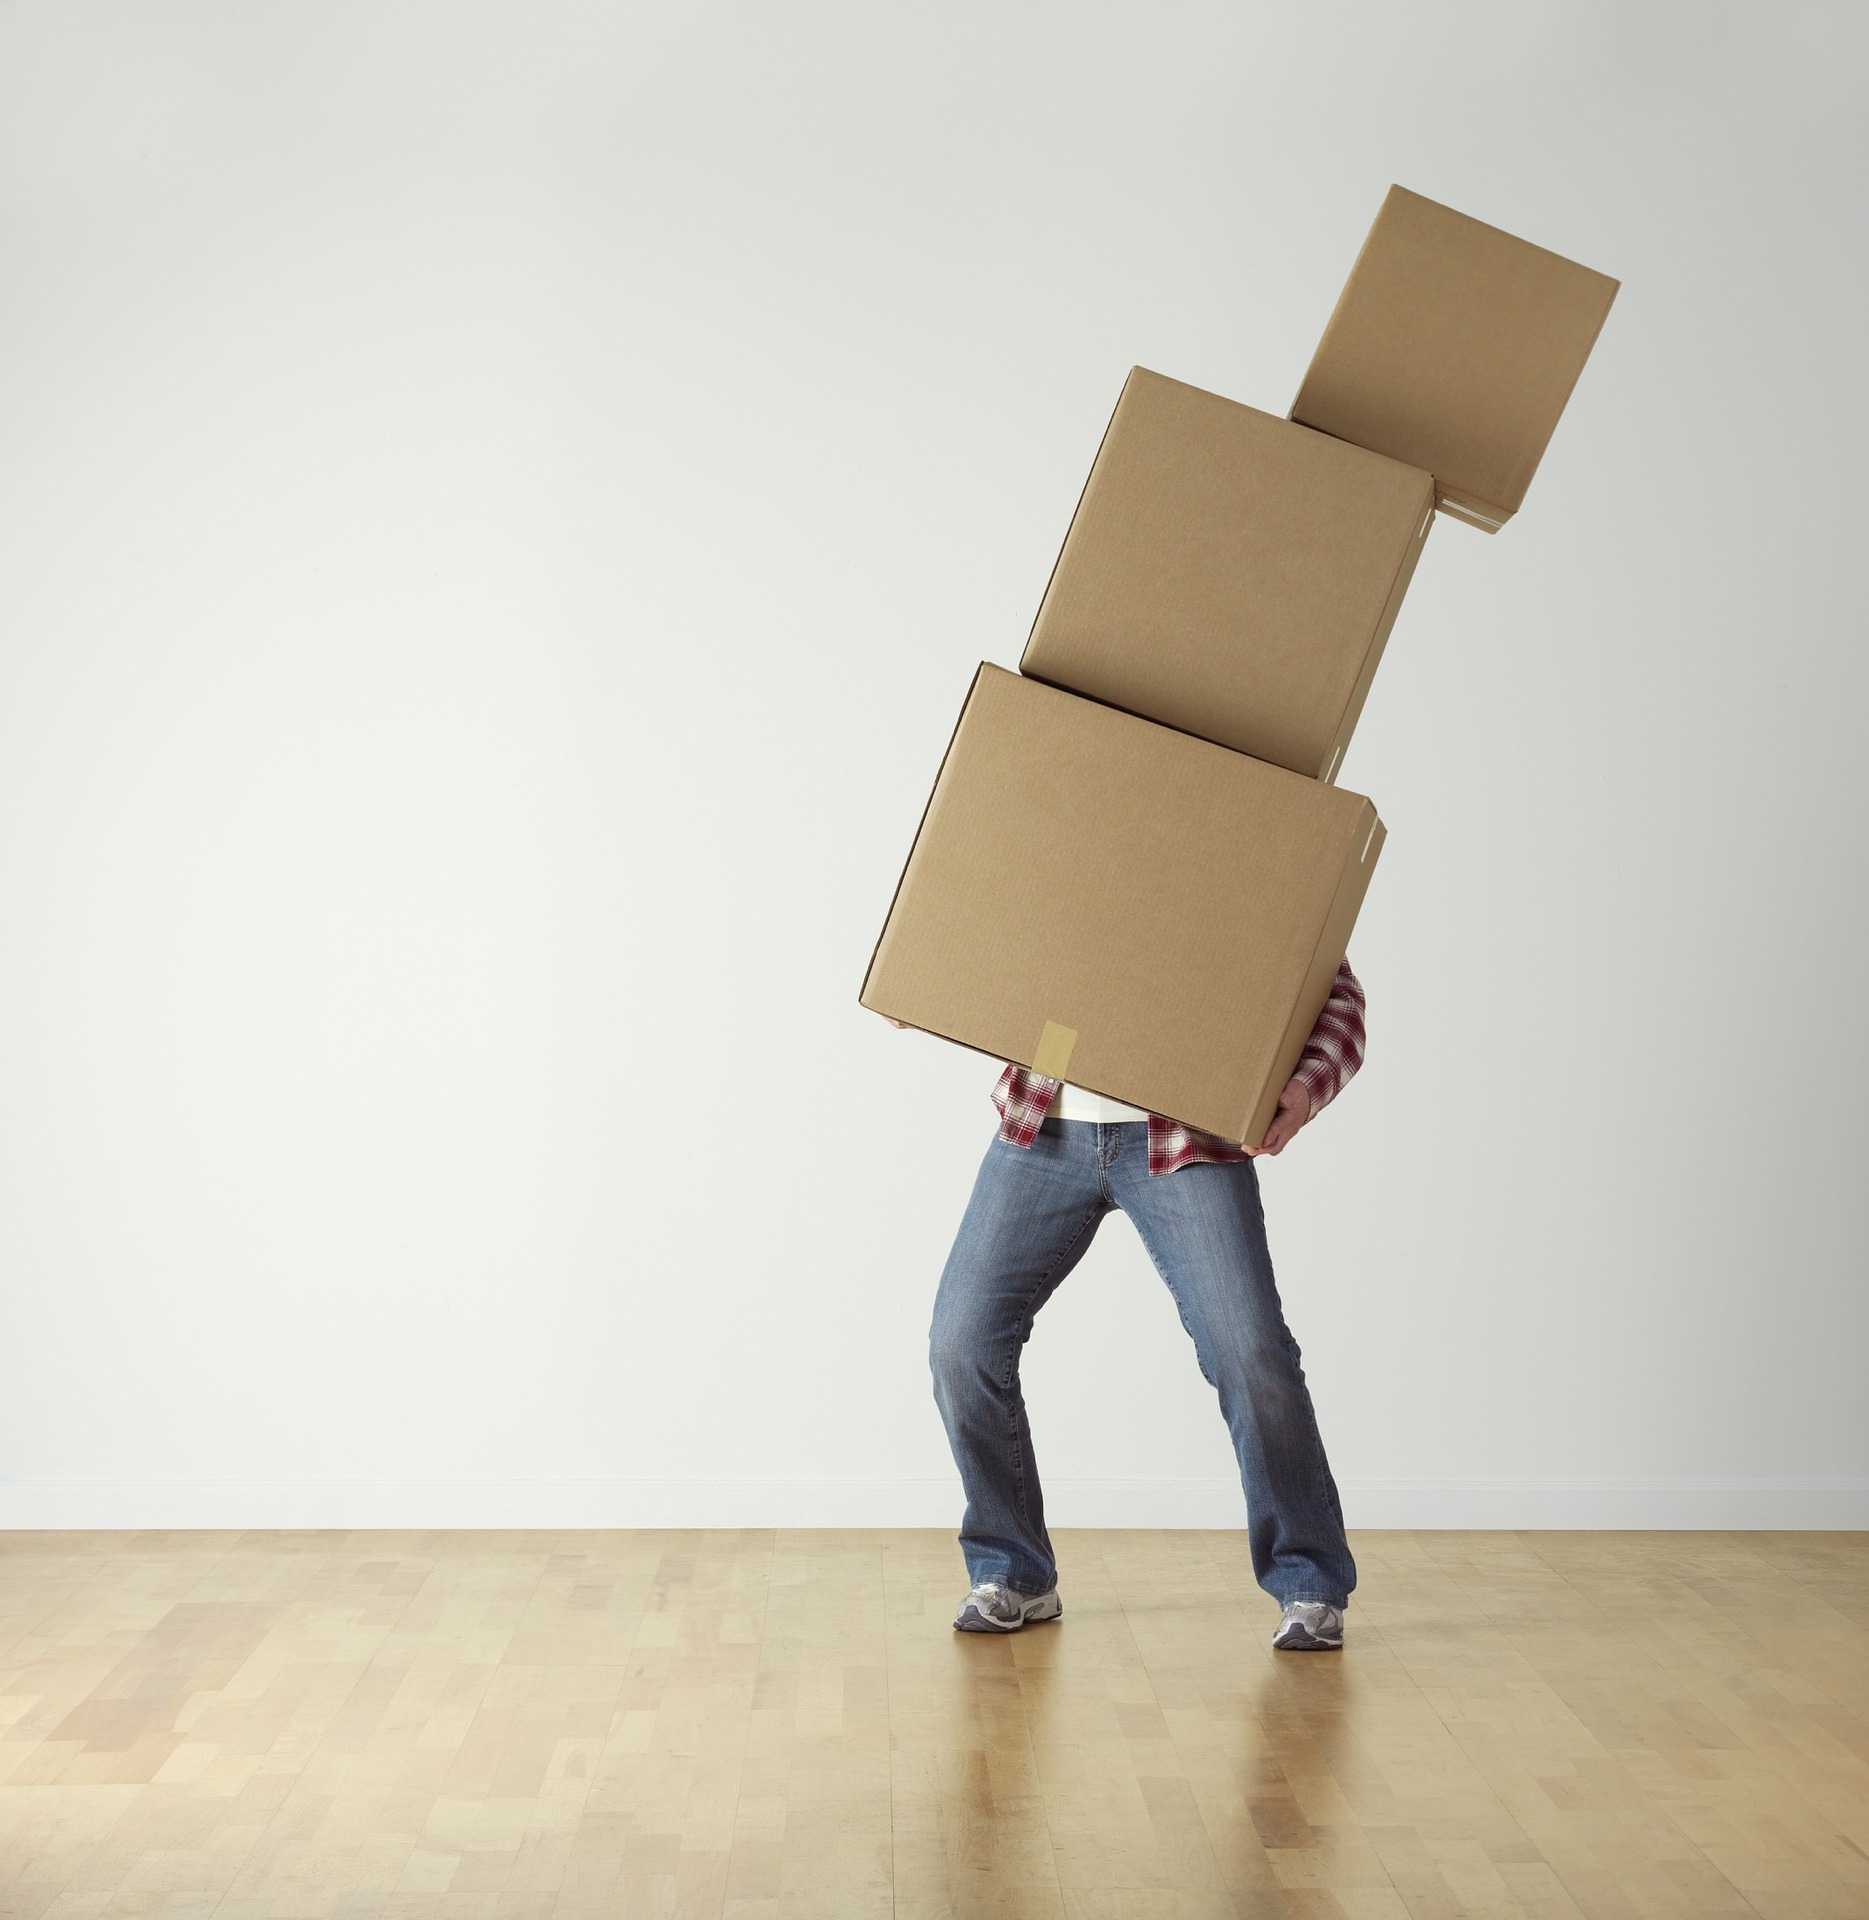 Photo of person carrying large stack of boxes.